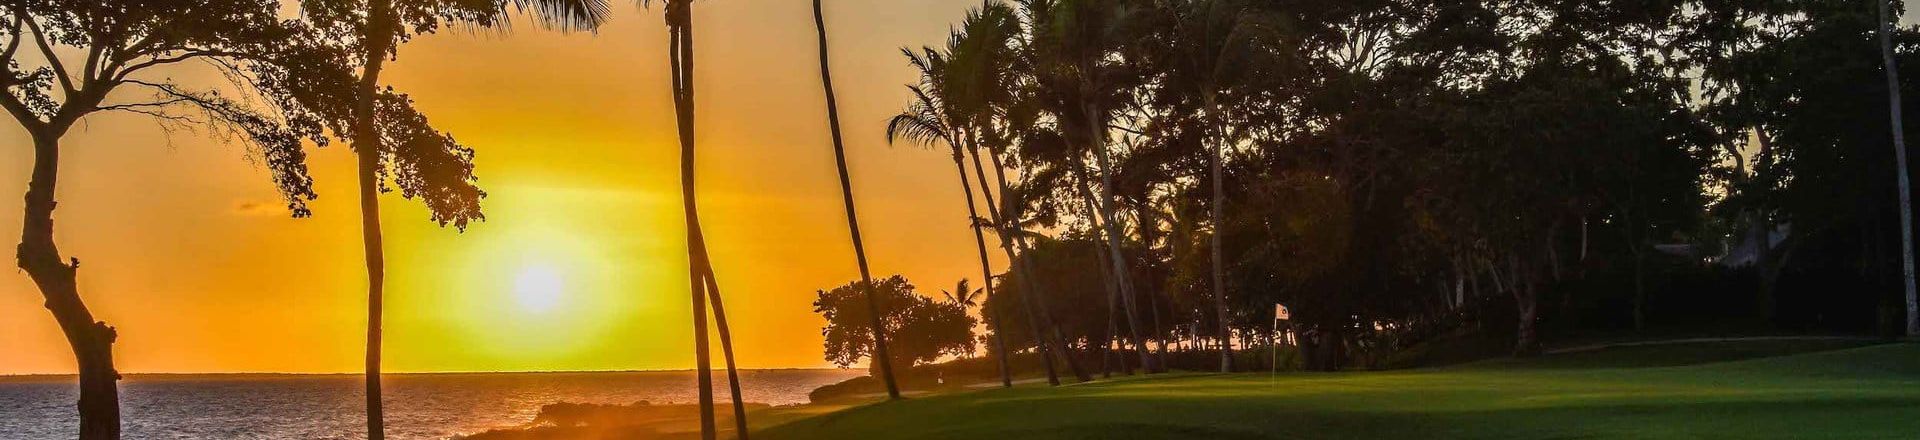 Golf Holidays in The Domincan Republic at Casa de Campo and Teeth of the Dog Golf